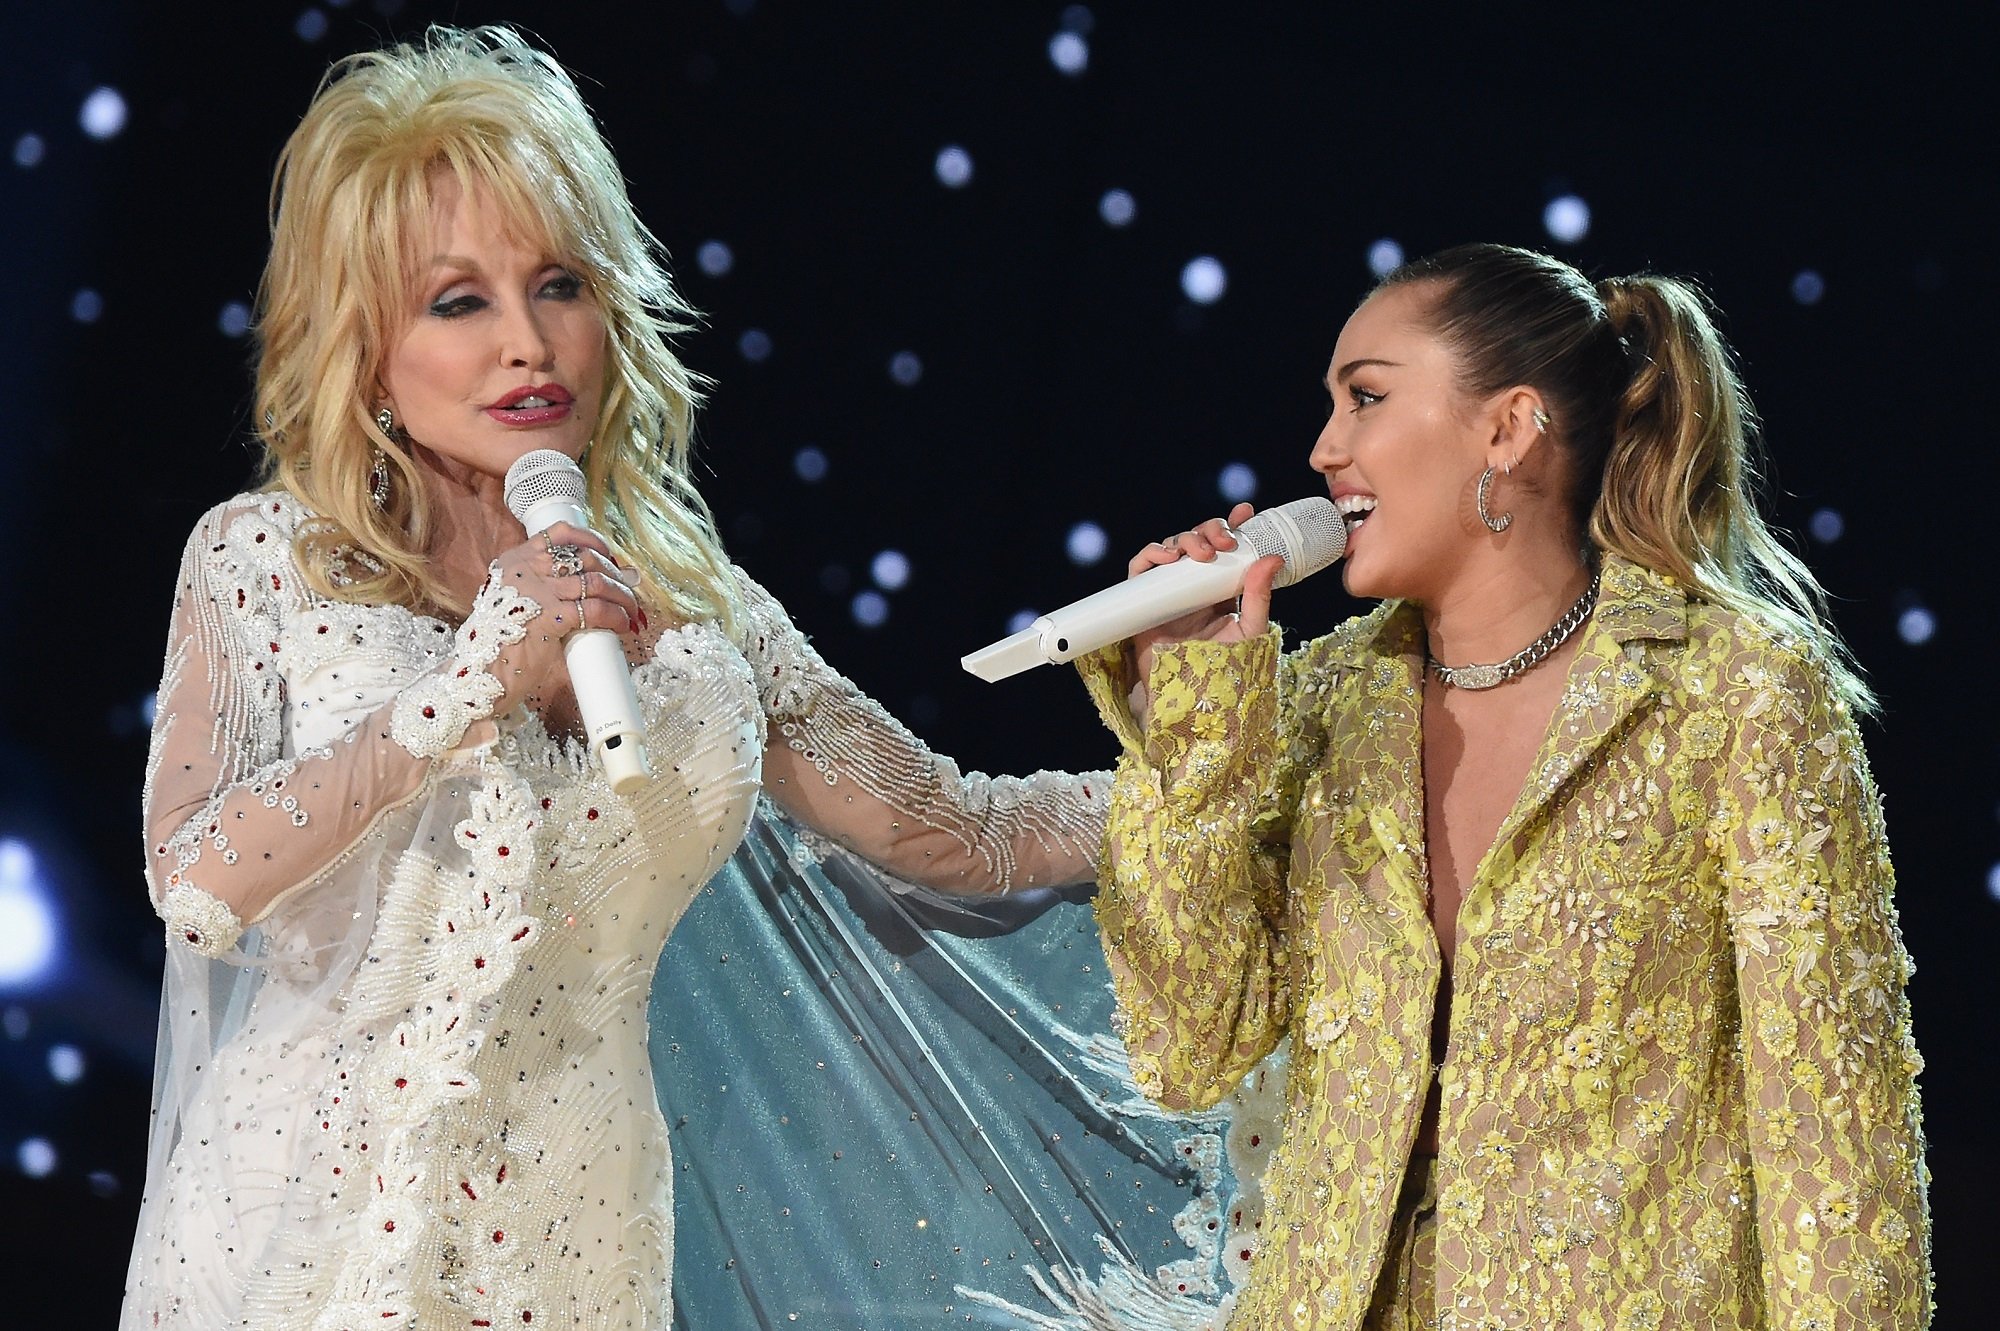 Dolly Parton and Miley Cyrus sing into white microphones side-by-side